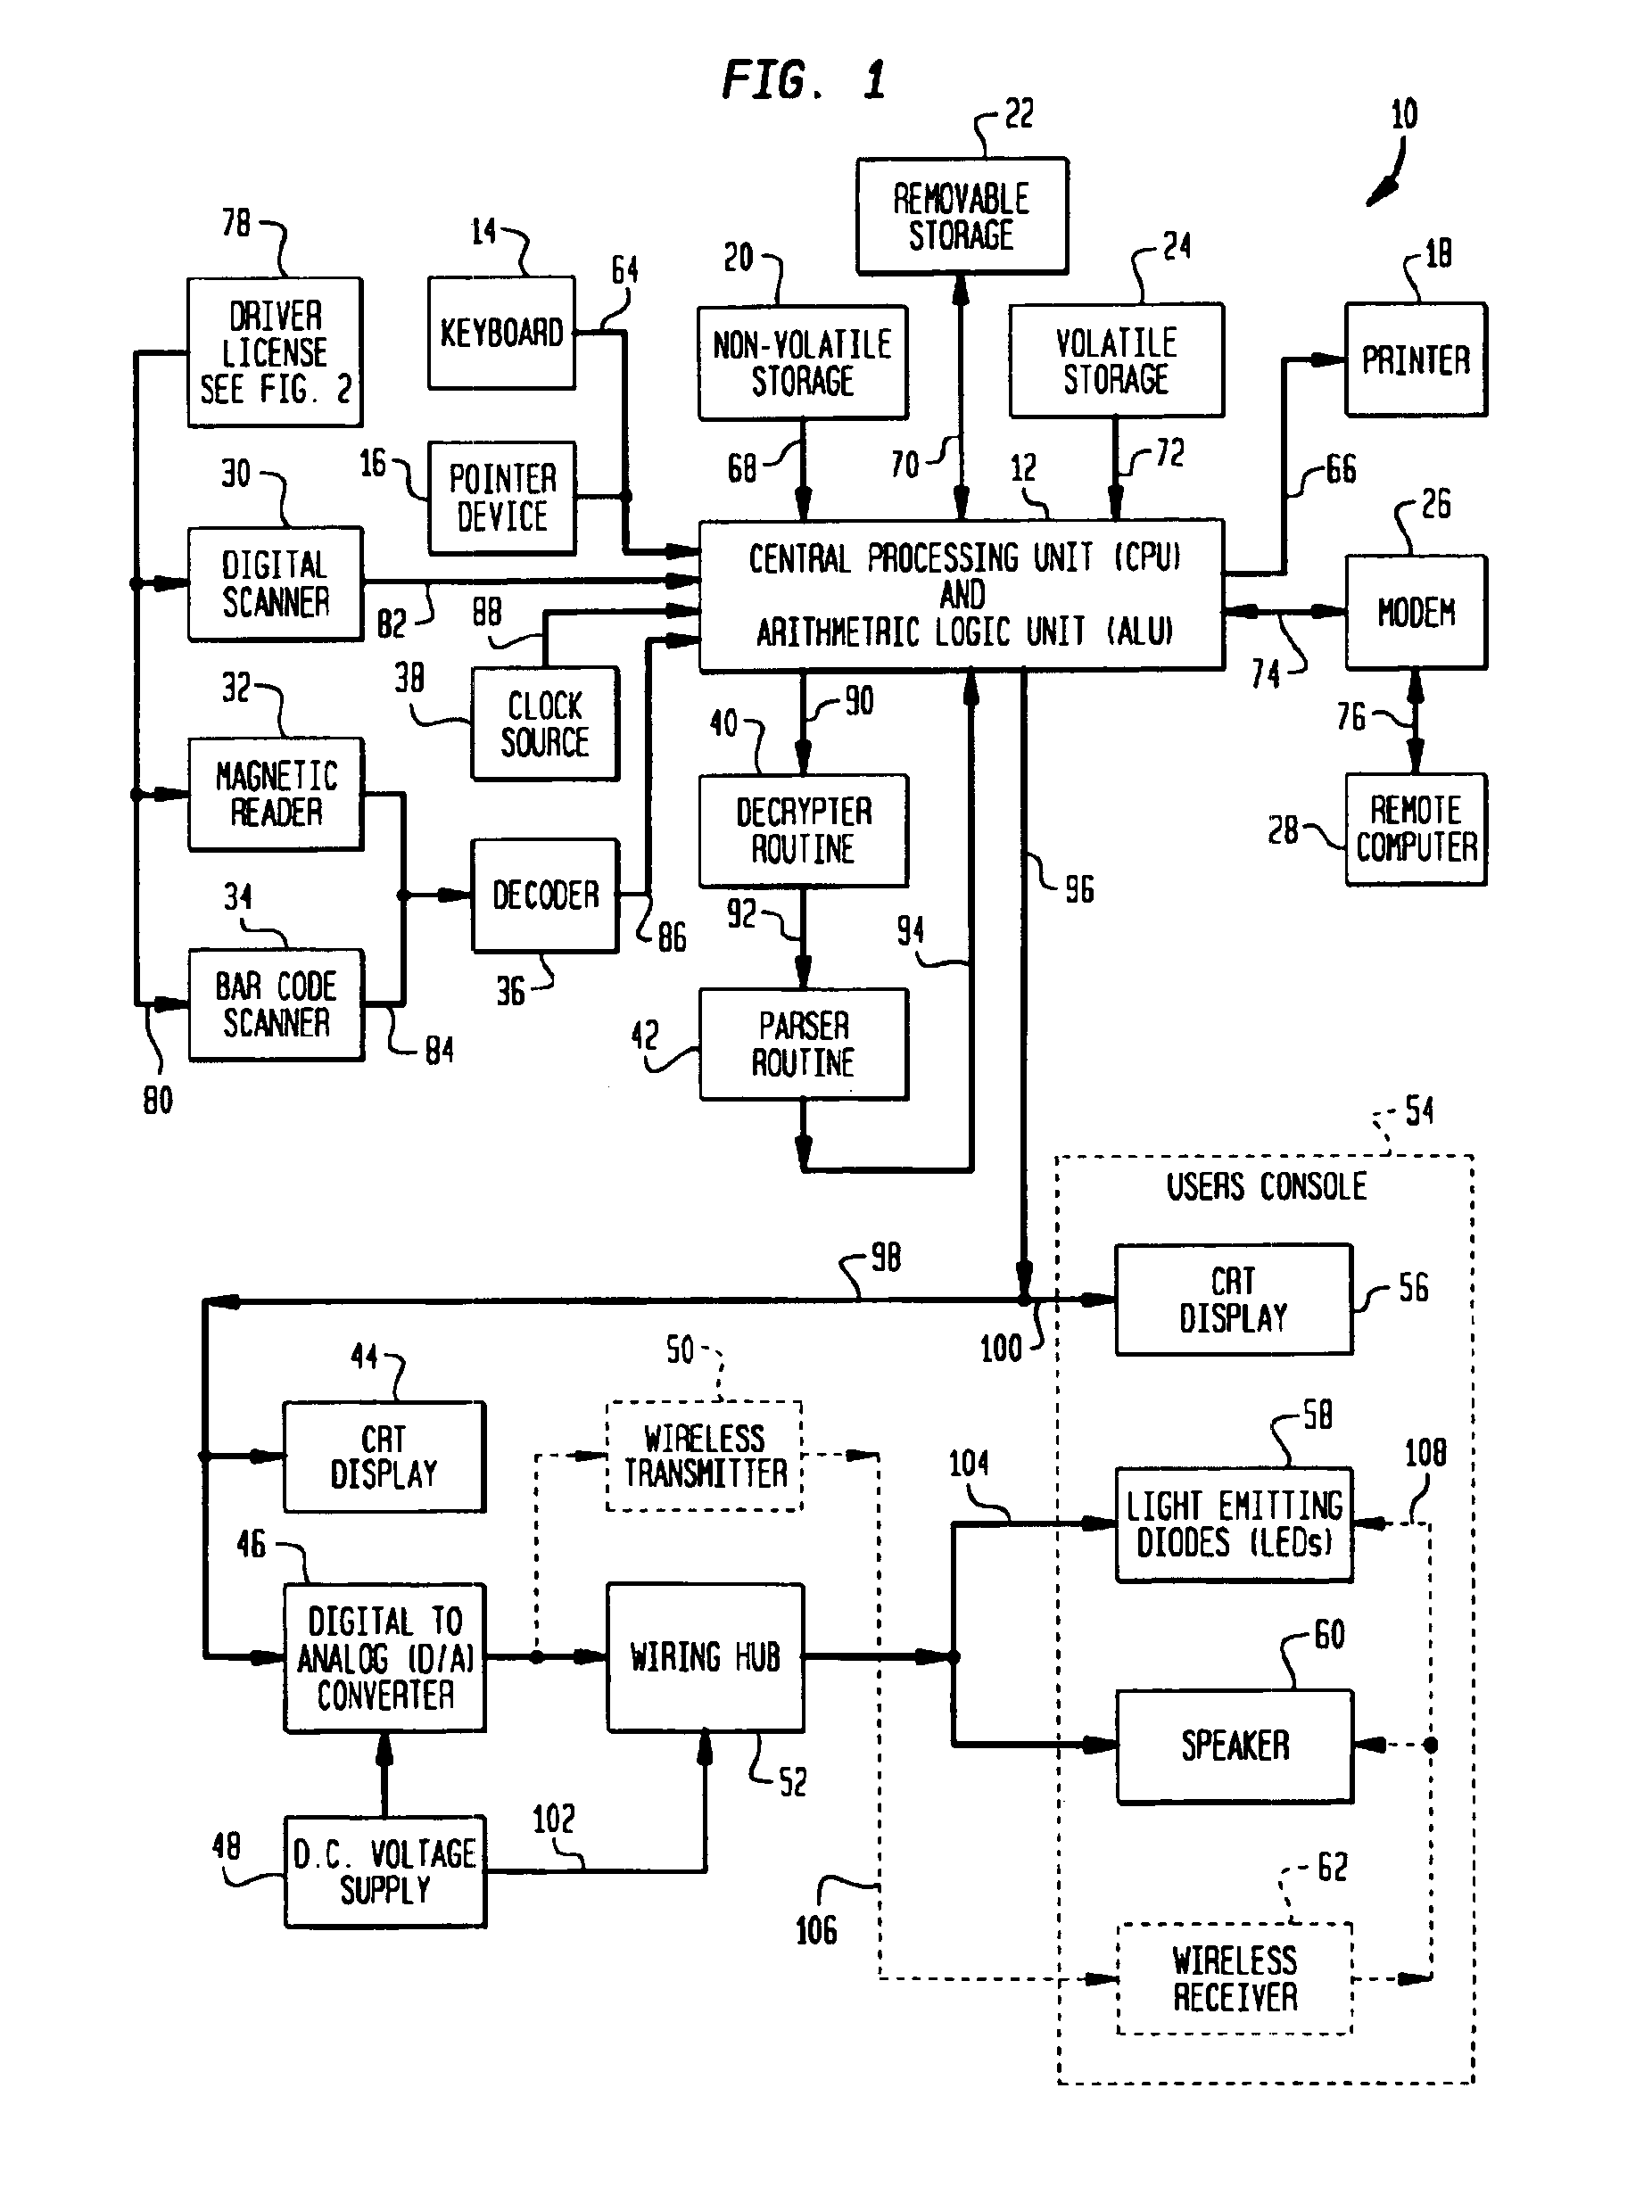 Authentication system for identification documents